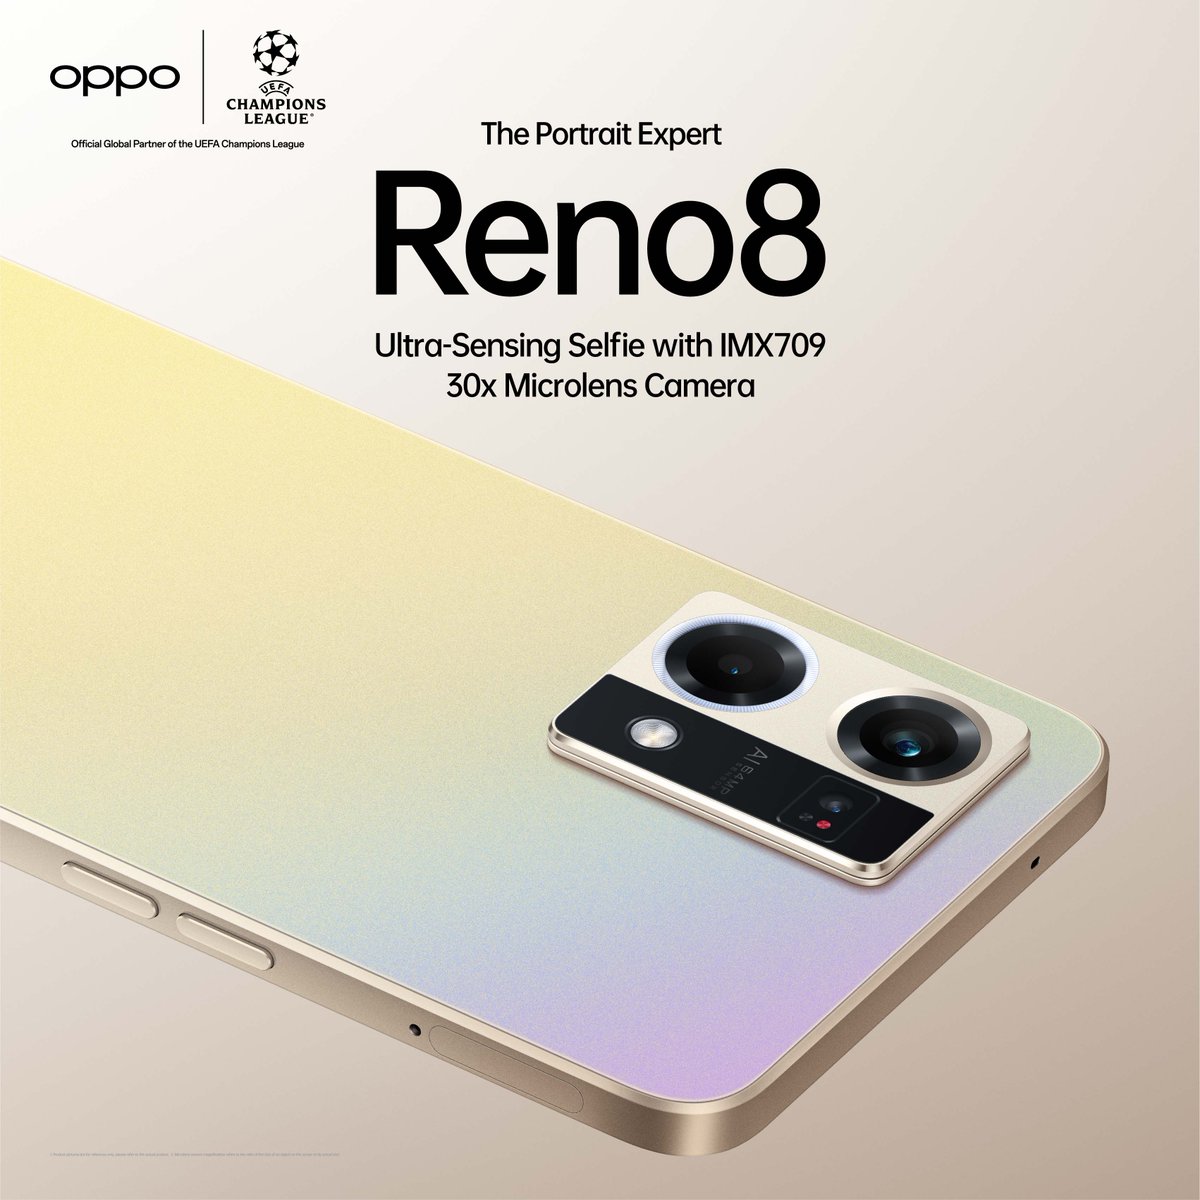 A reminder that the #Reno8; a stunning piece of art and technology, is now available in all authorized in all authorized stores nationwide. Did you notice something different on the image? Can you tell us. #OPPONigeria